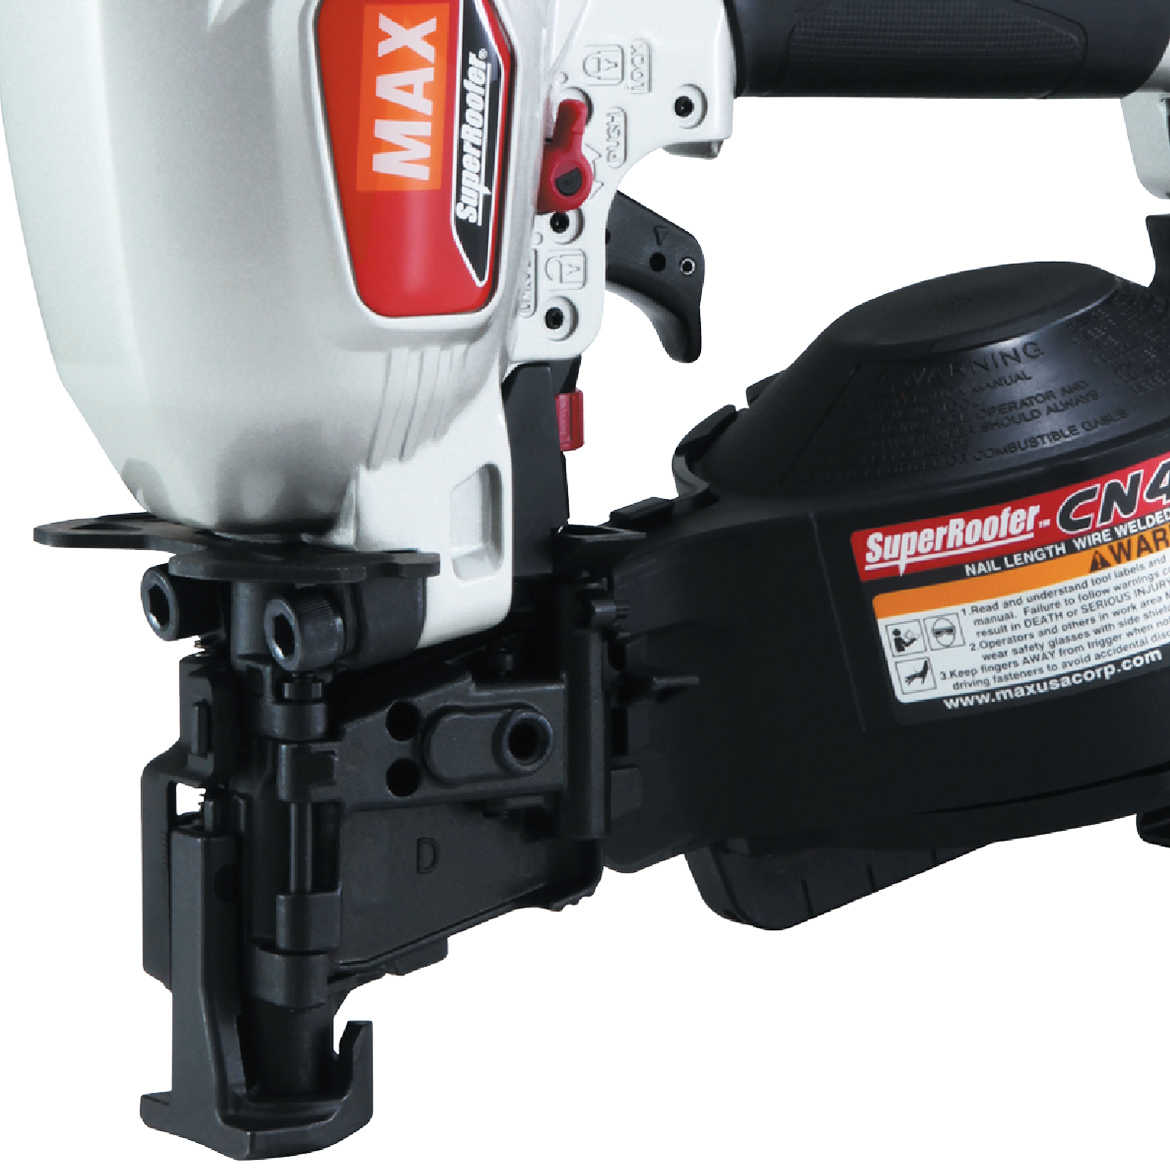 MAX CN445R3 1-3/4 in. x 0.120 in. SuperRoofer Coil Roofing Nailer